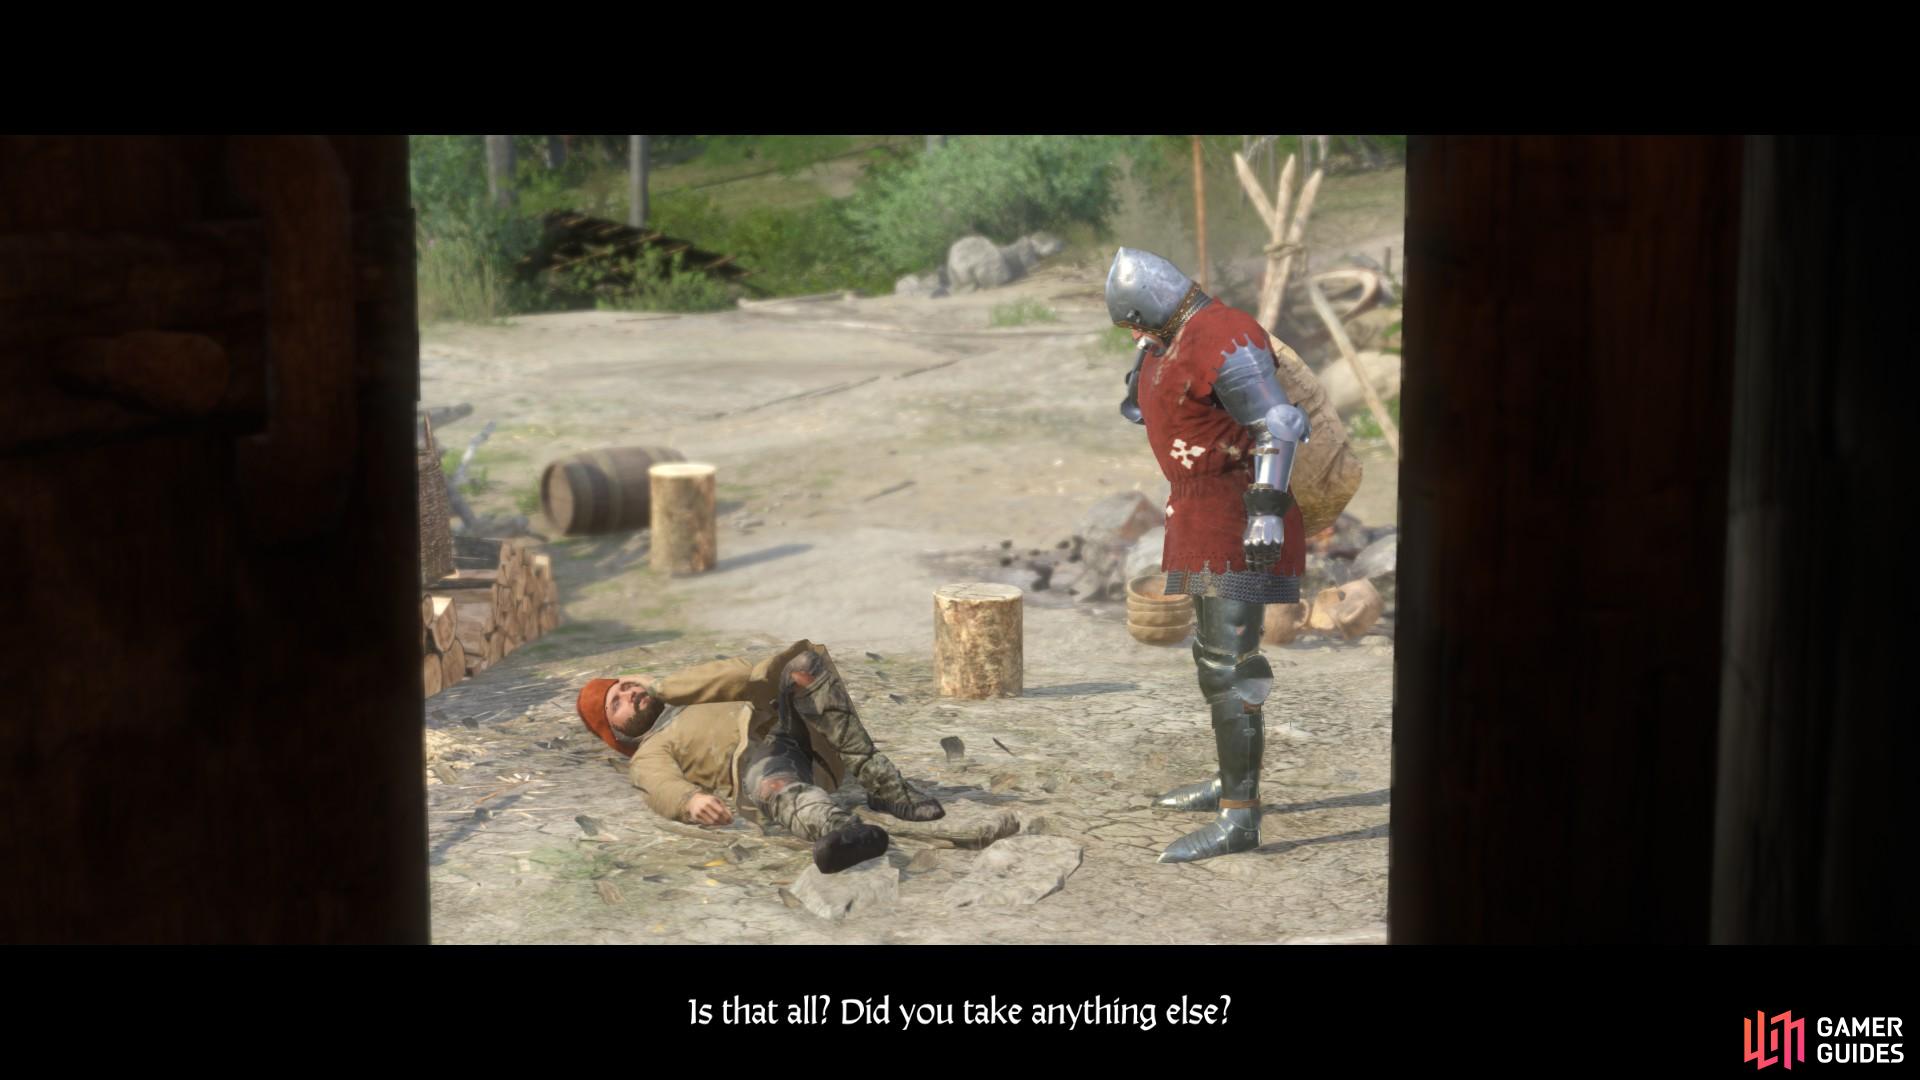 When you are done questioning the wounded mercenary a cut scene will follow in which the mysterious German knight shows up and takes a bag of coin. 